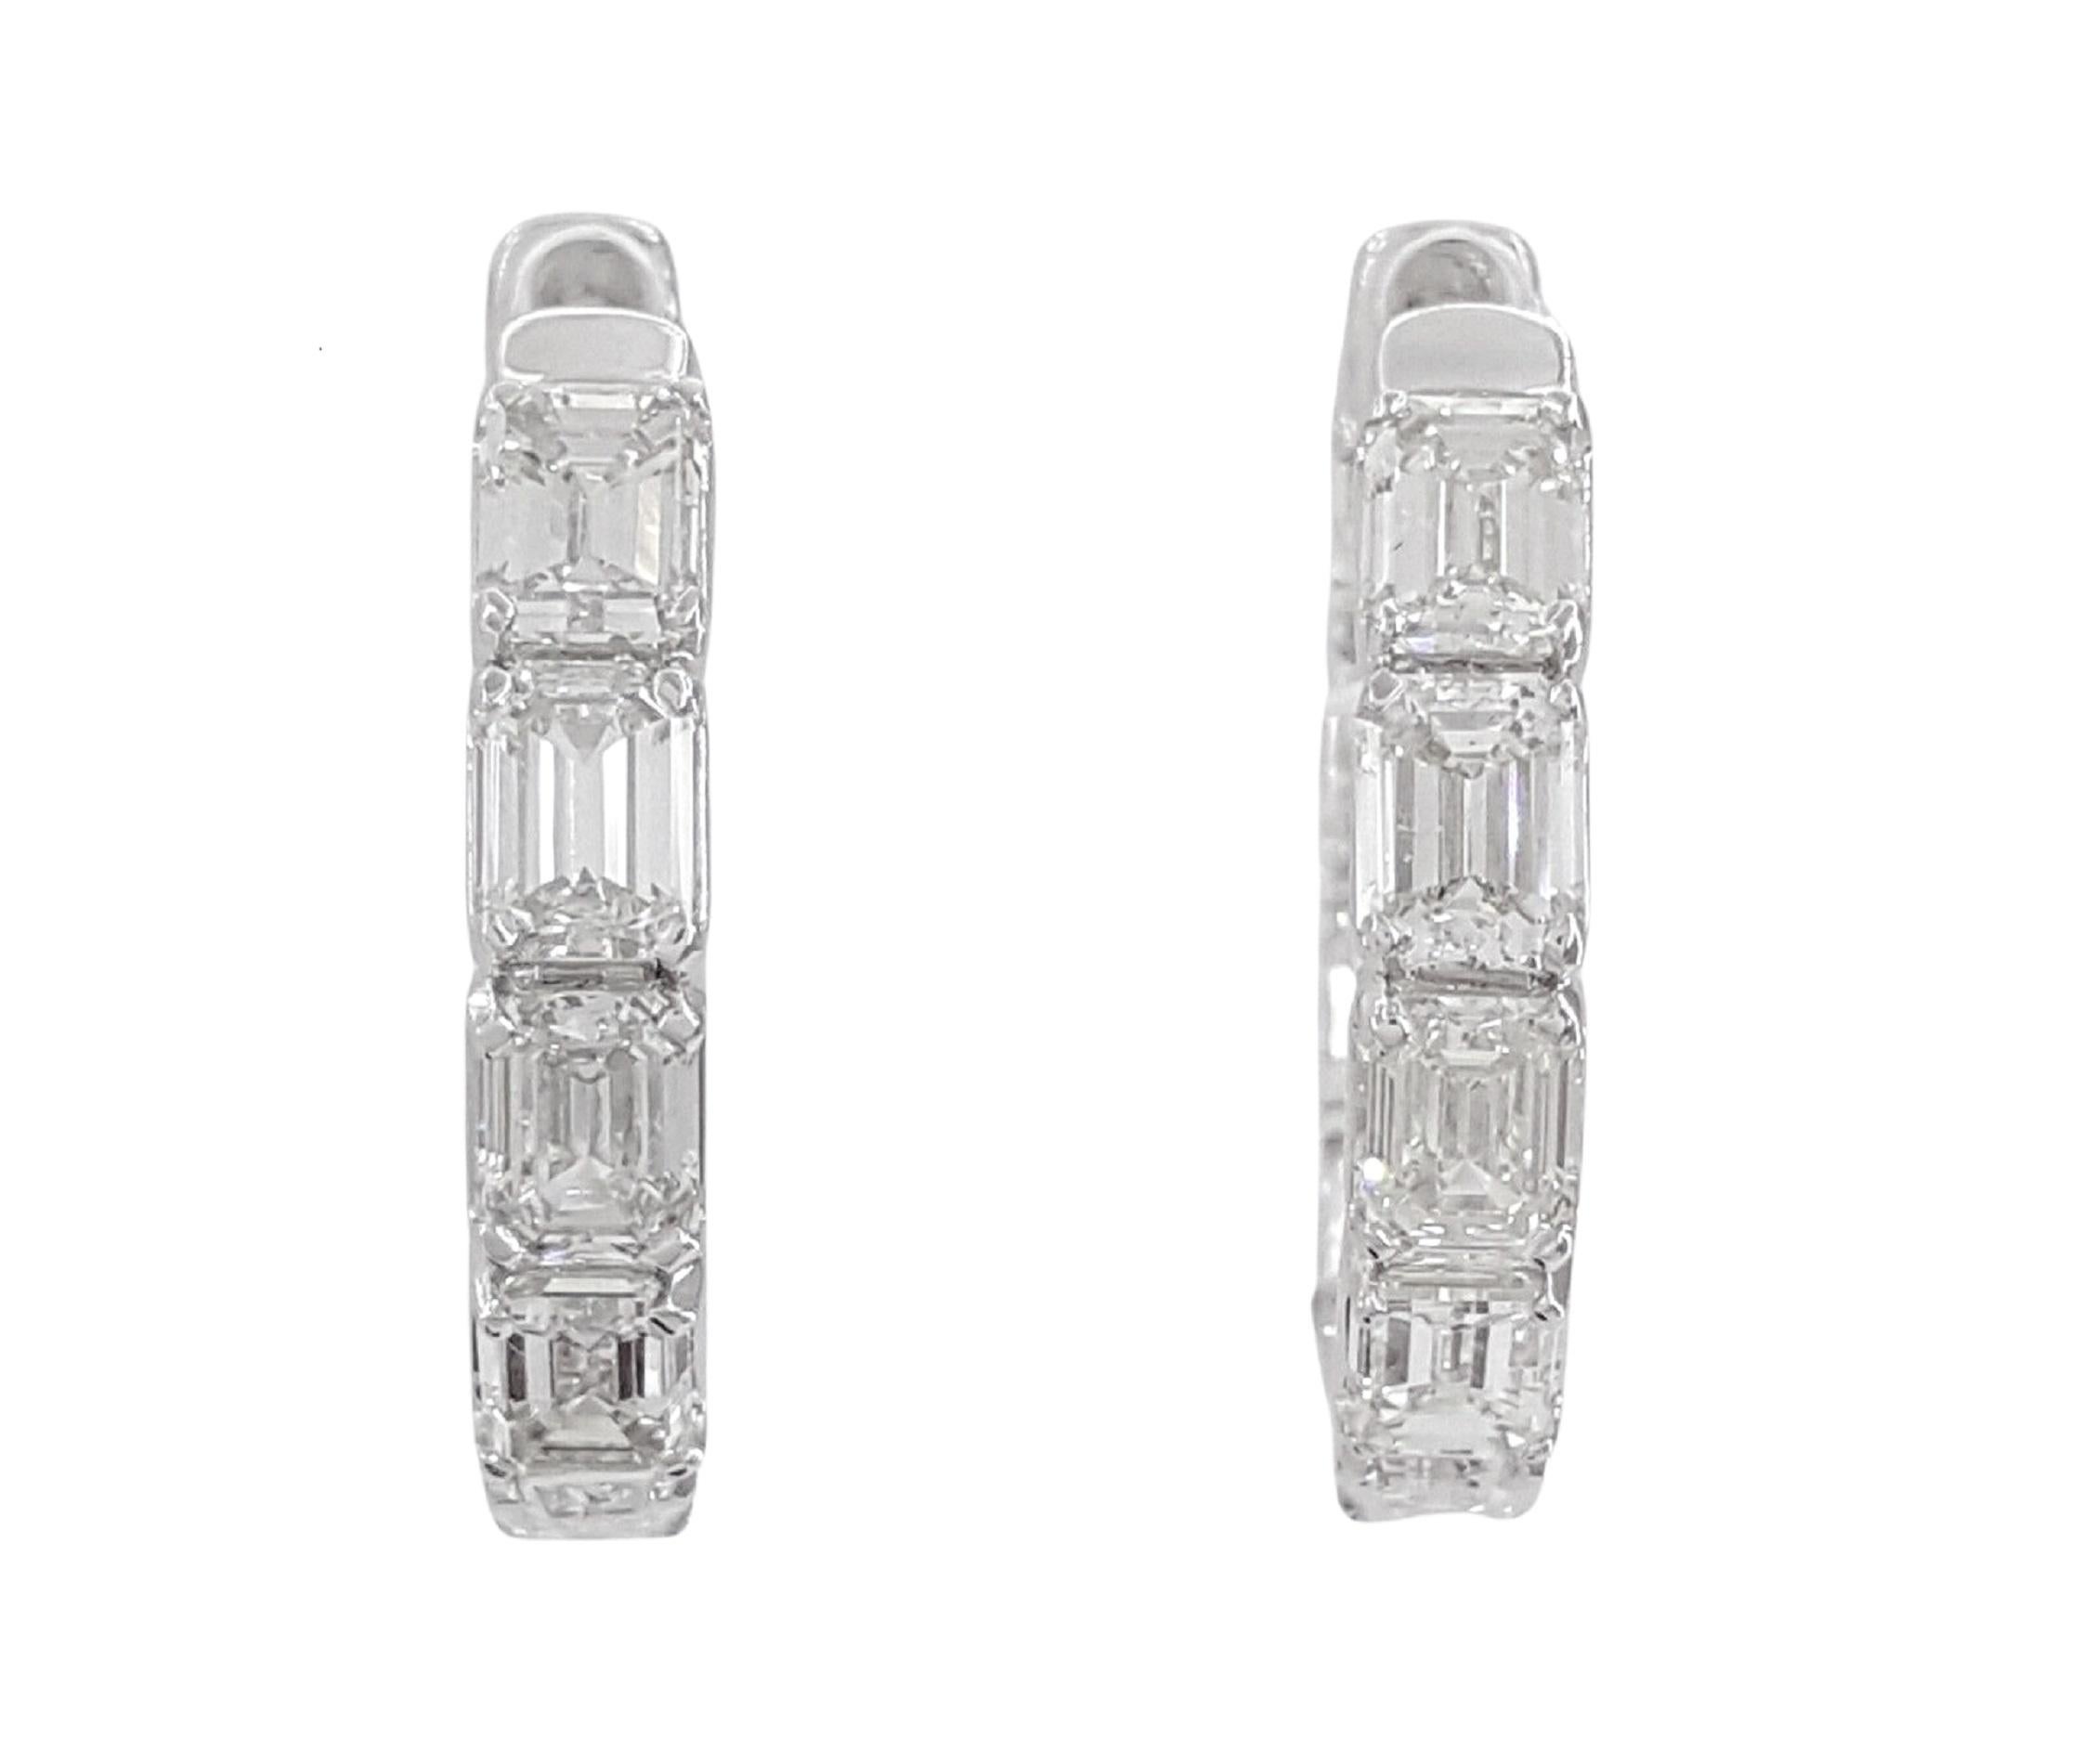 An exquisite pair of approximately 5 Carat Emerald Cut Diamond Earrings.

There are 36 (both earrings total) Natural Emerald Cut Diamonds weighing approximately 5 ct total weight. The diamonds are G-I in color and VS1-SI1 in clarity.